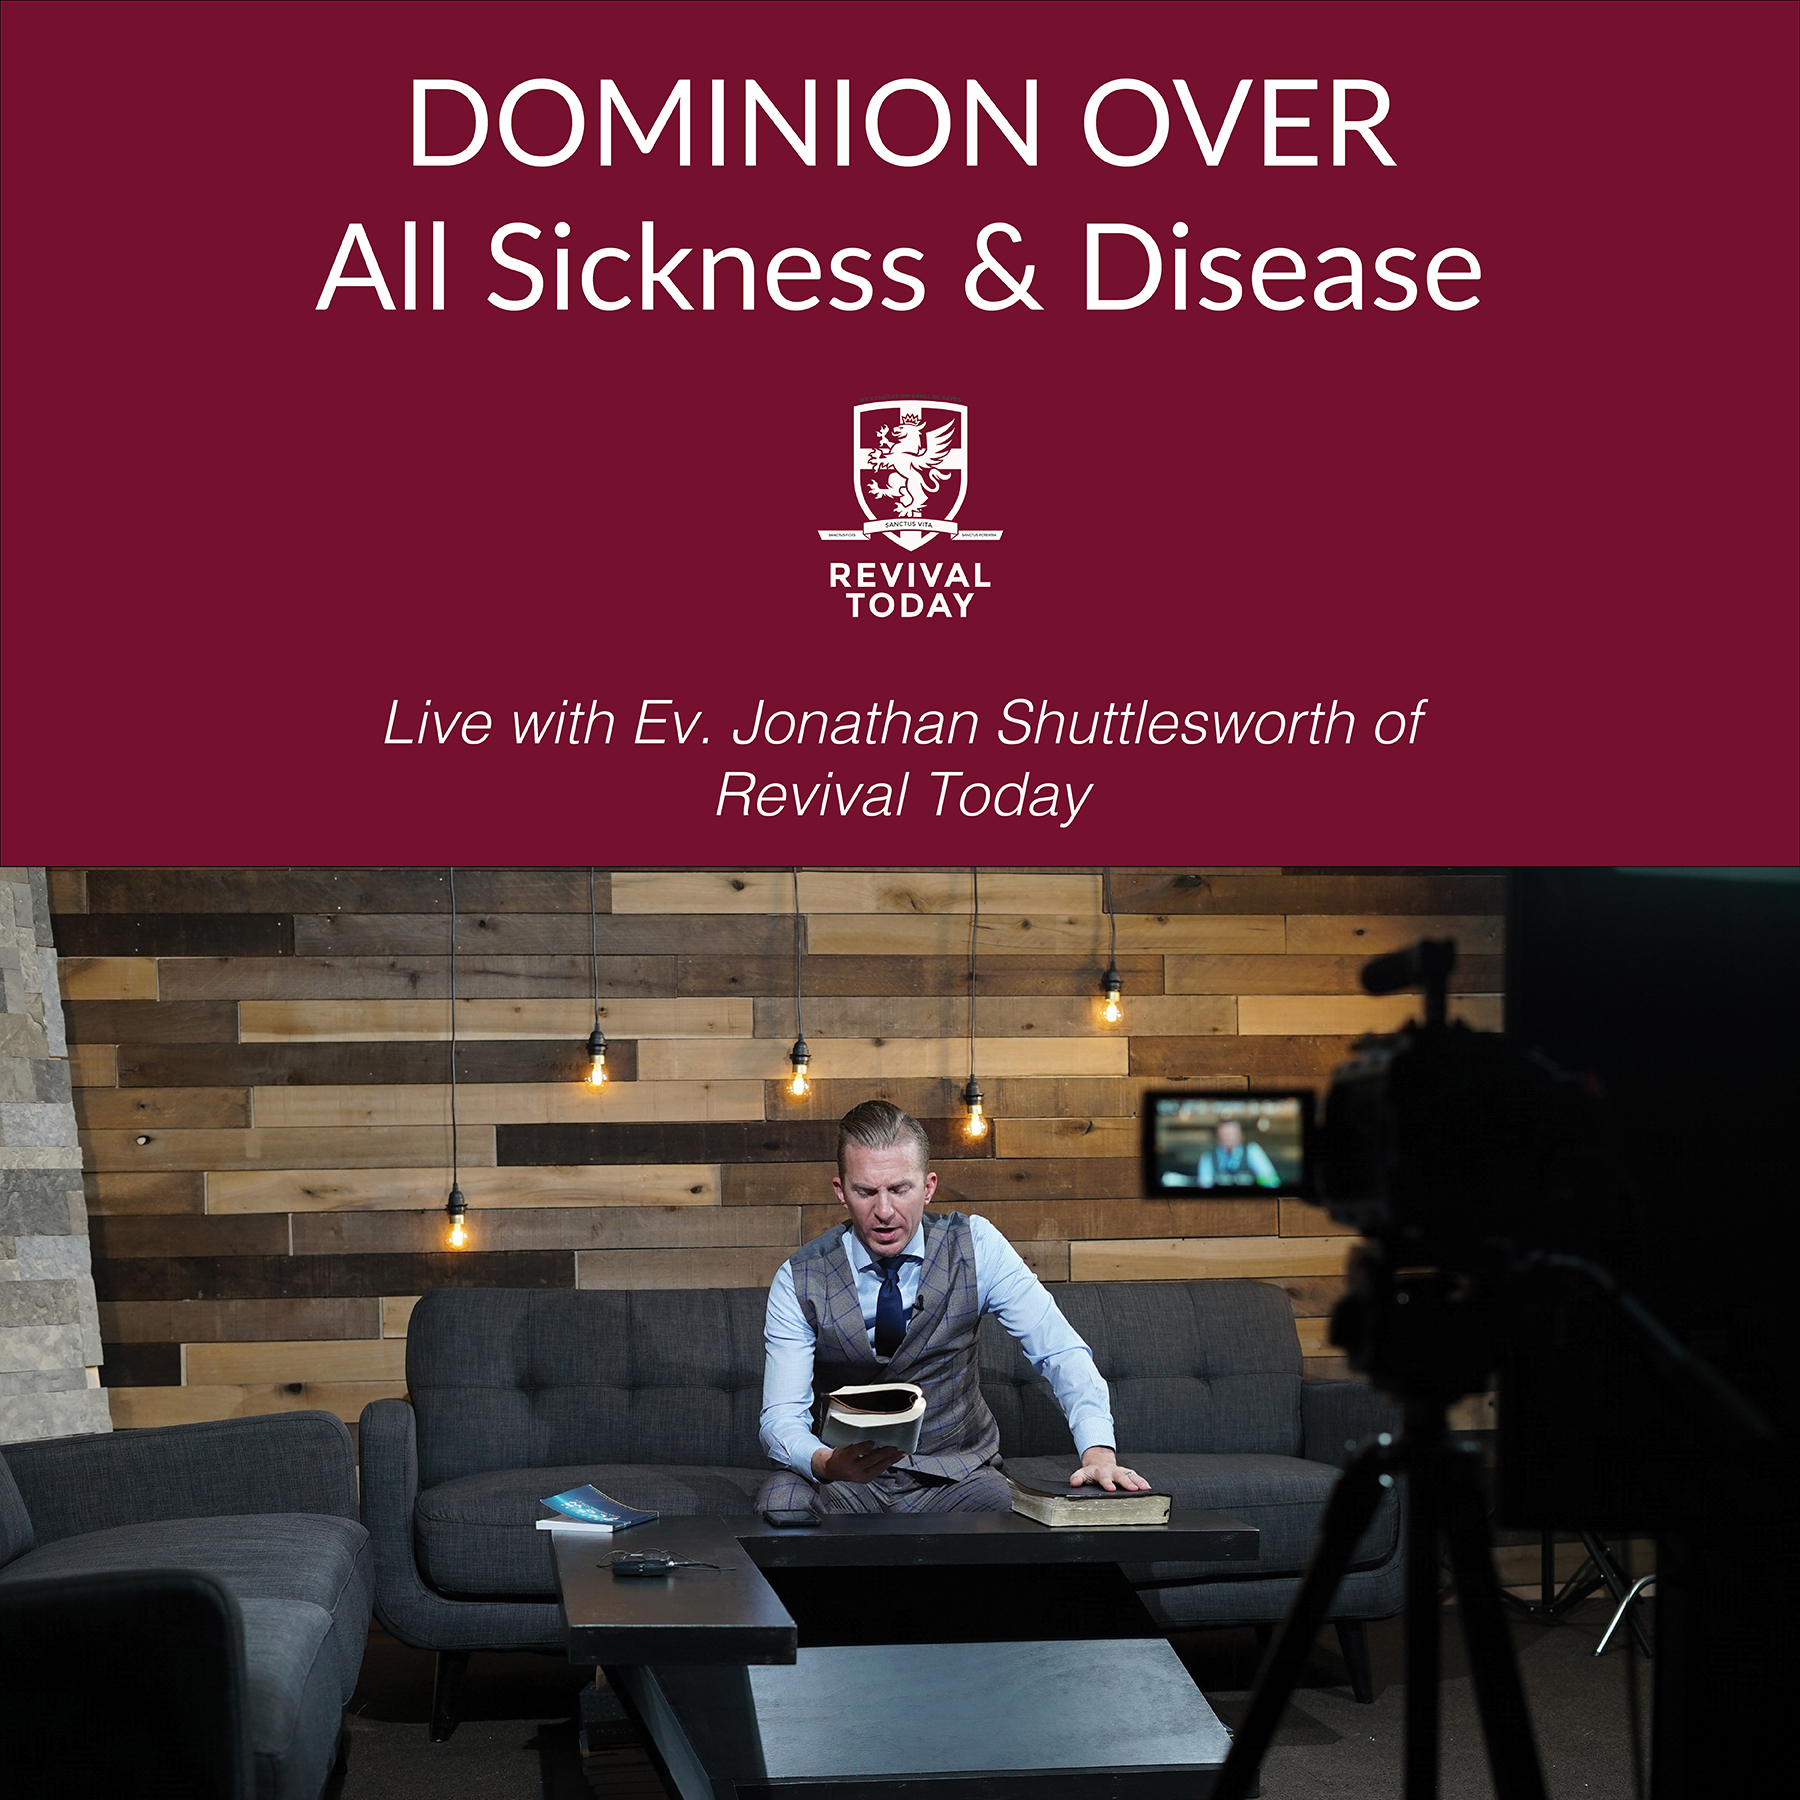 Dominion over all sickness and disease